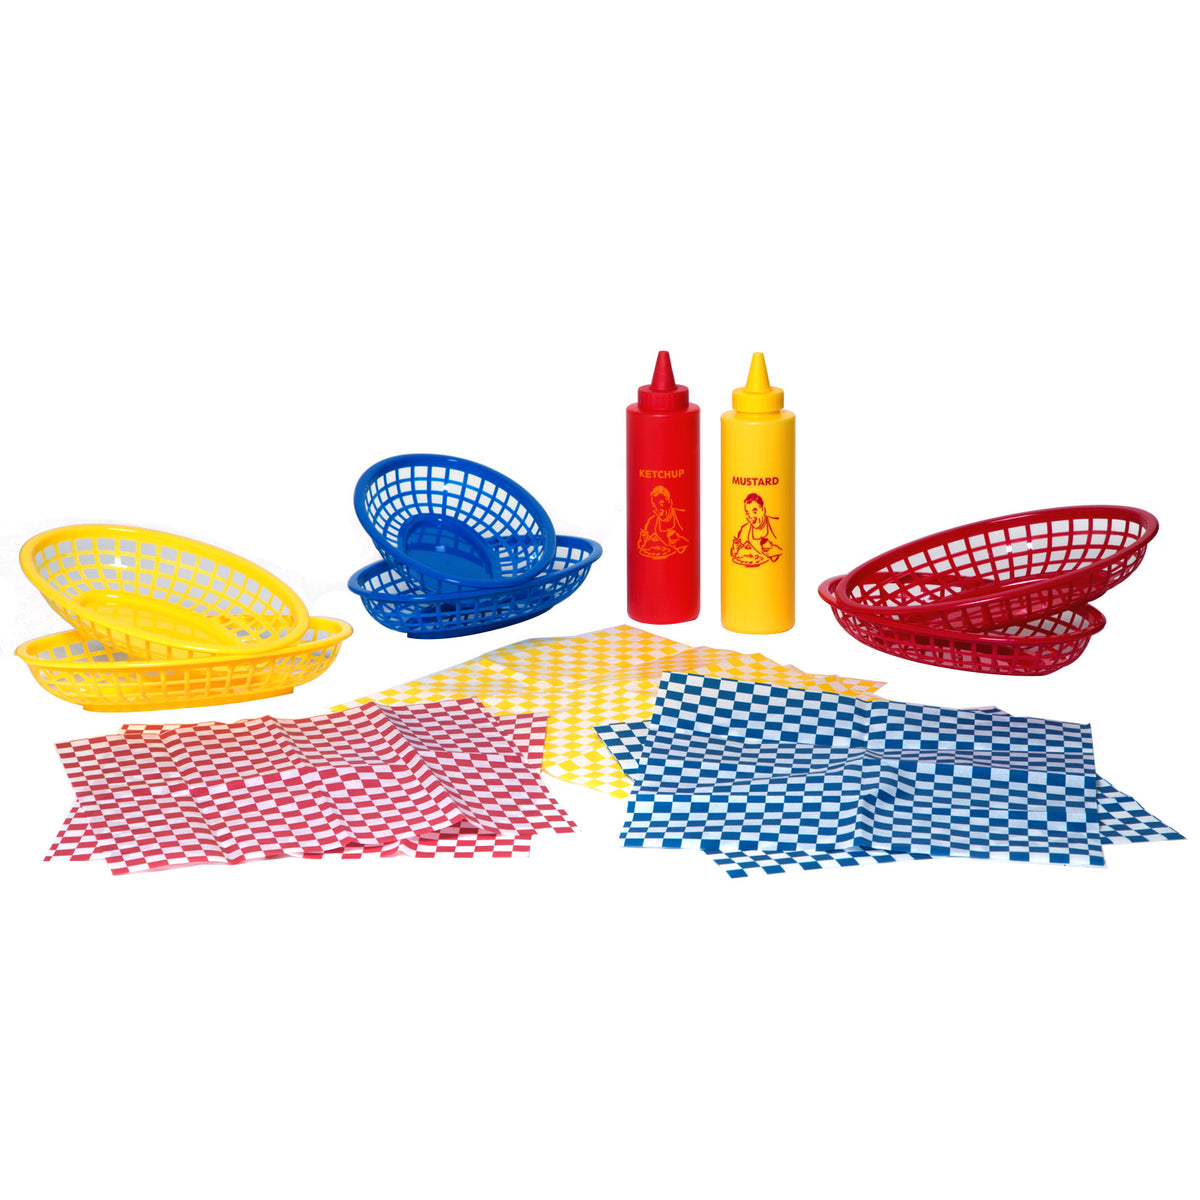 buy picnic supplies at cheap rate in bulk. wholesale & retail outdoor cooler & picnic items store.